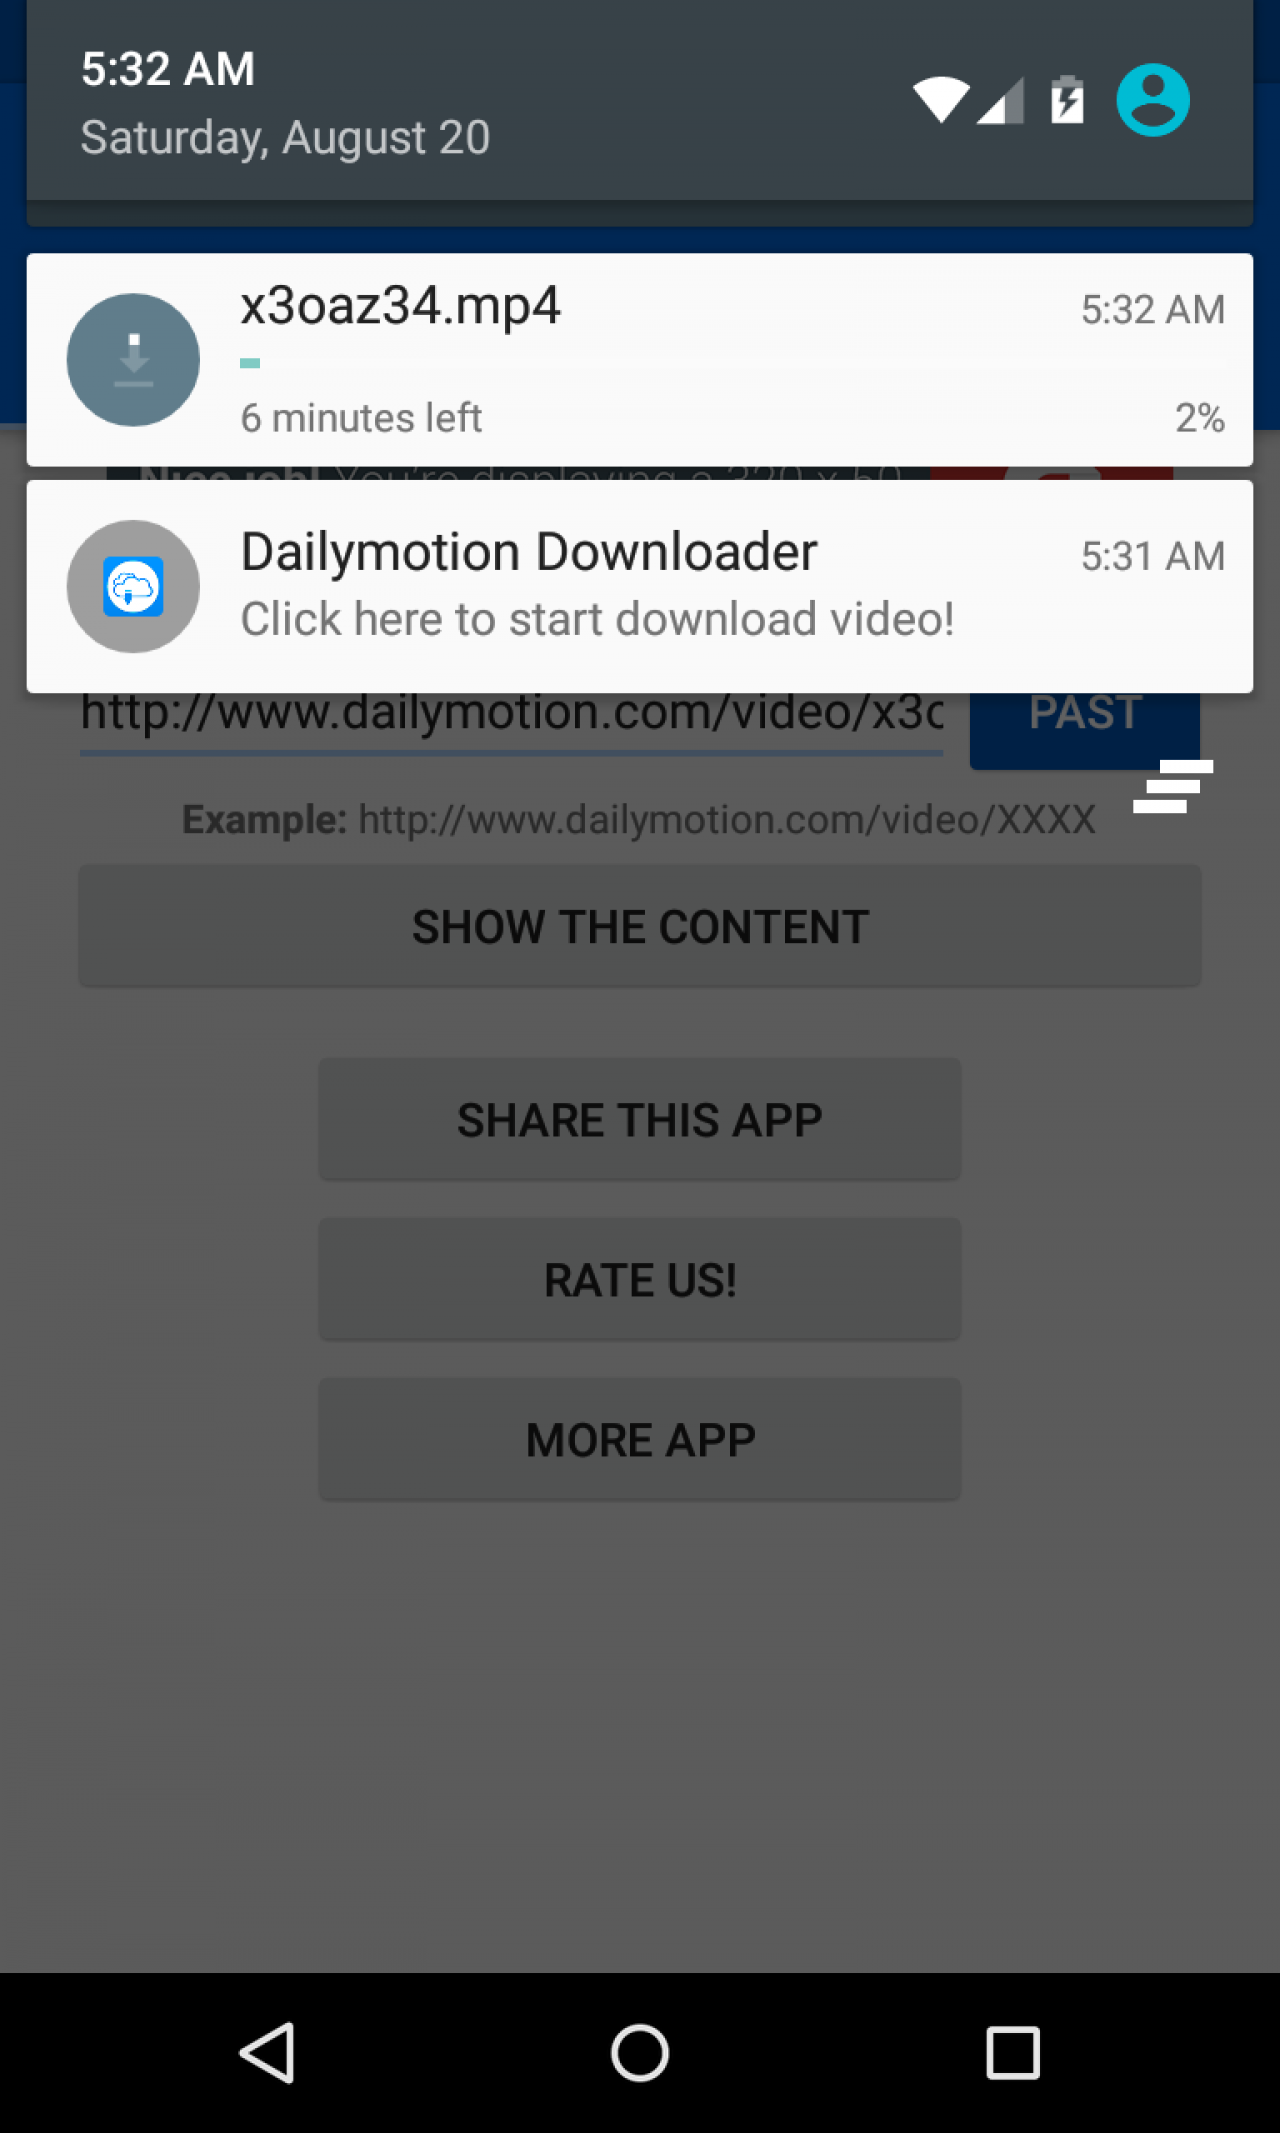 Dailymotion video download app for android mobile